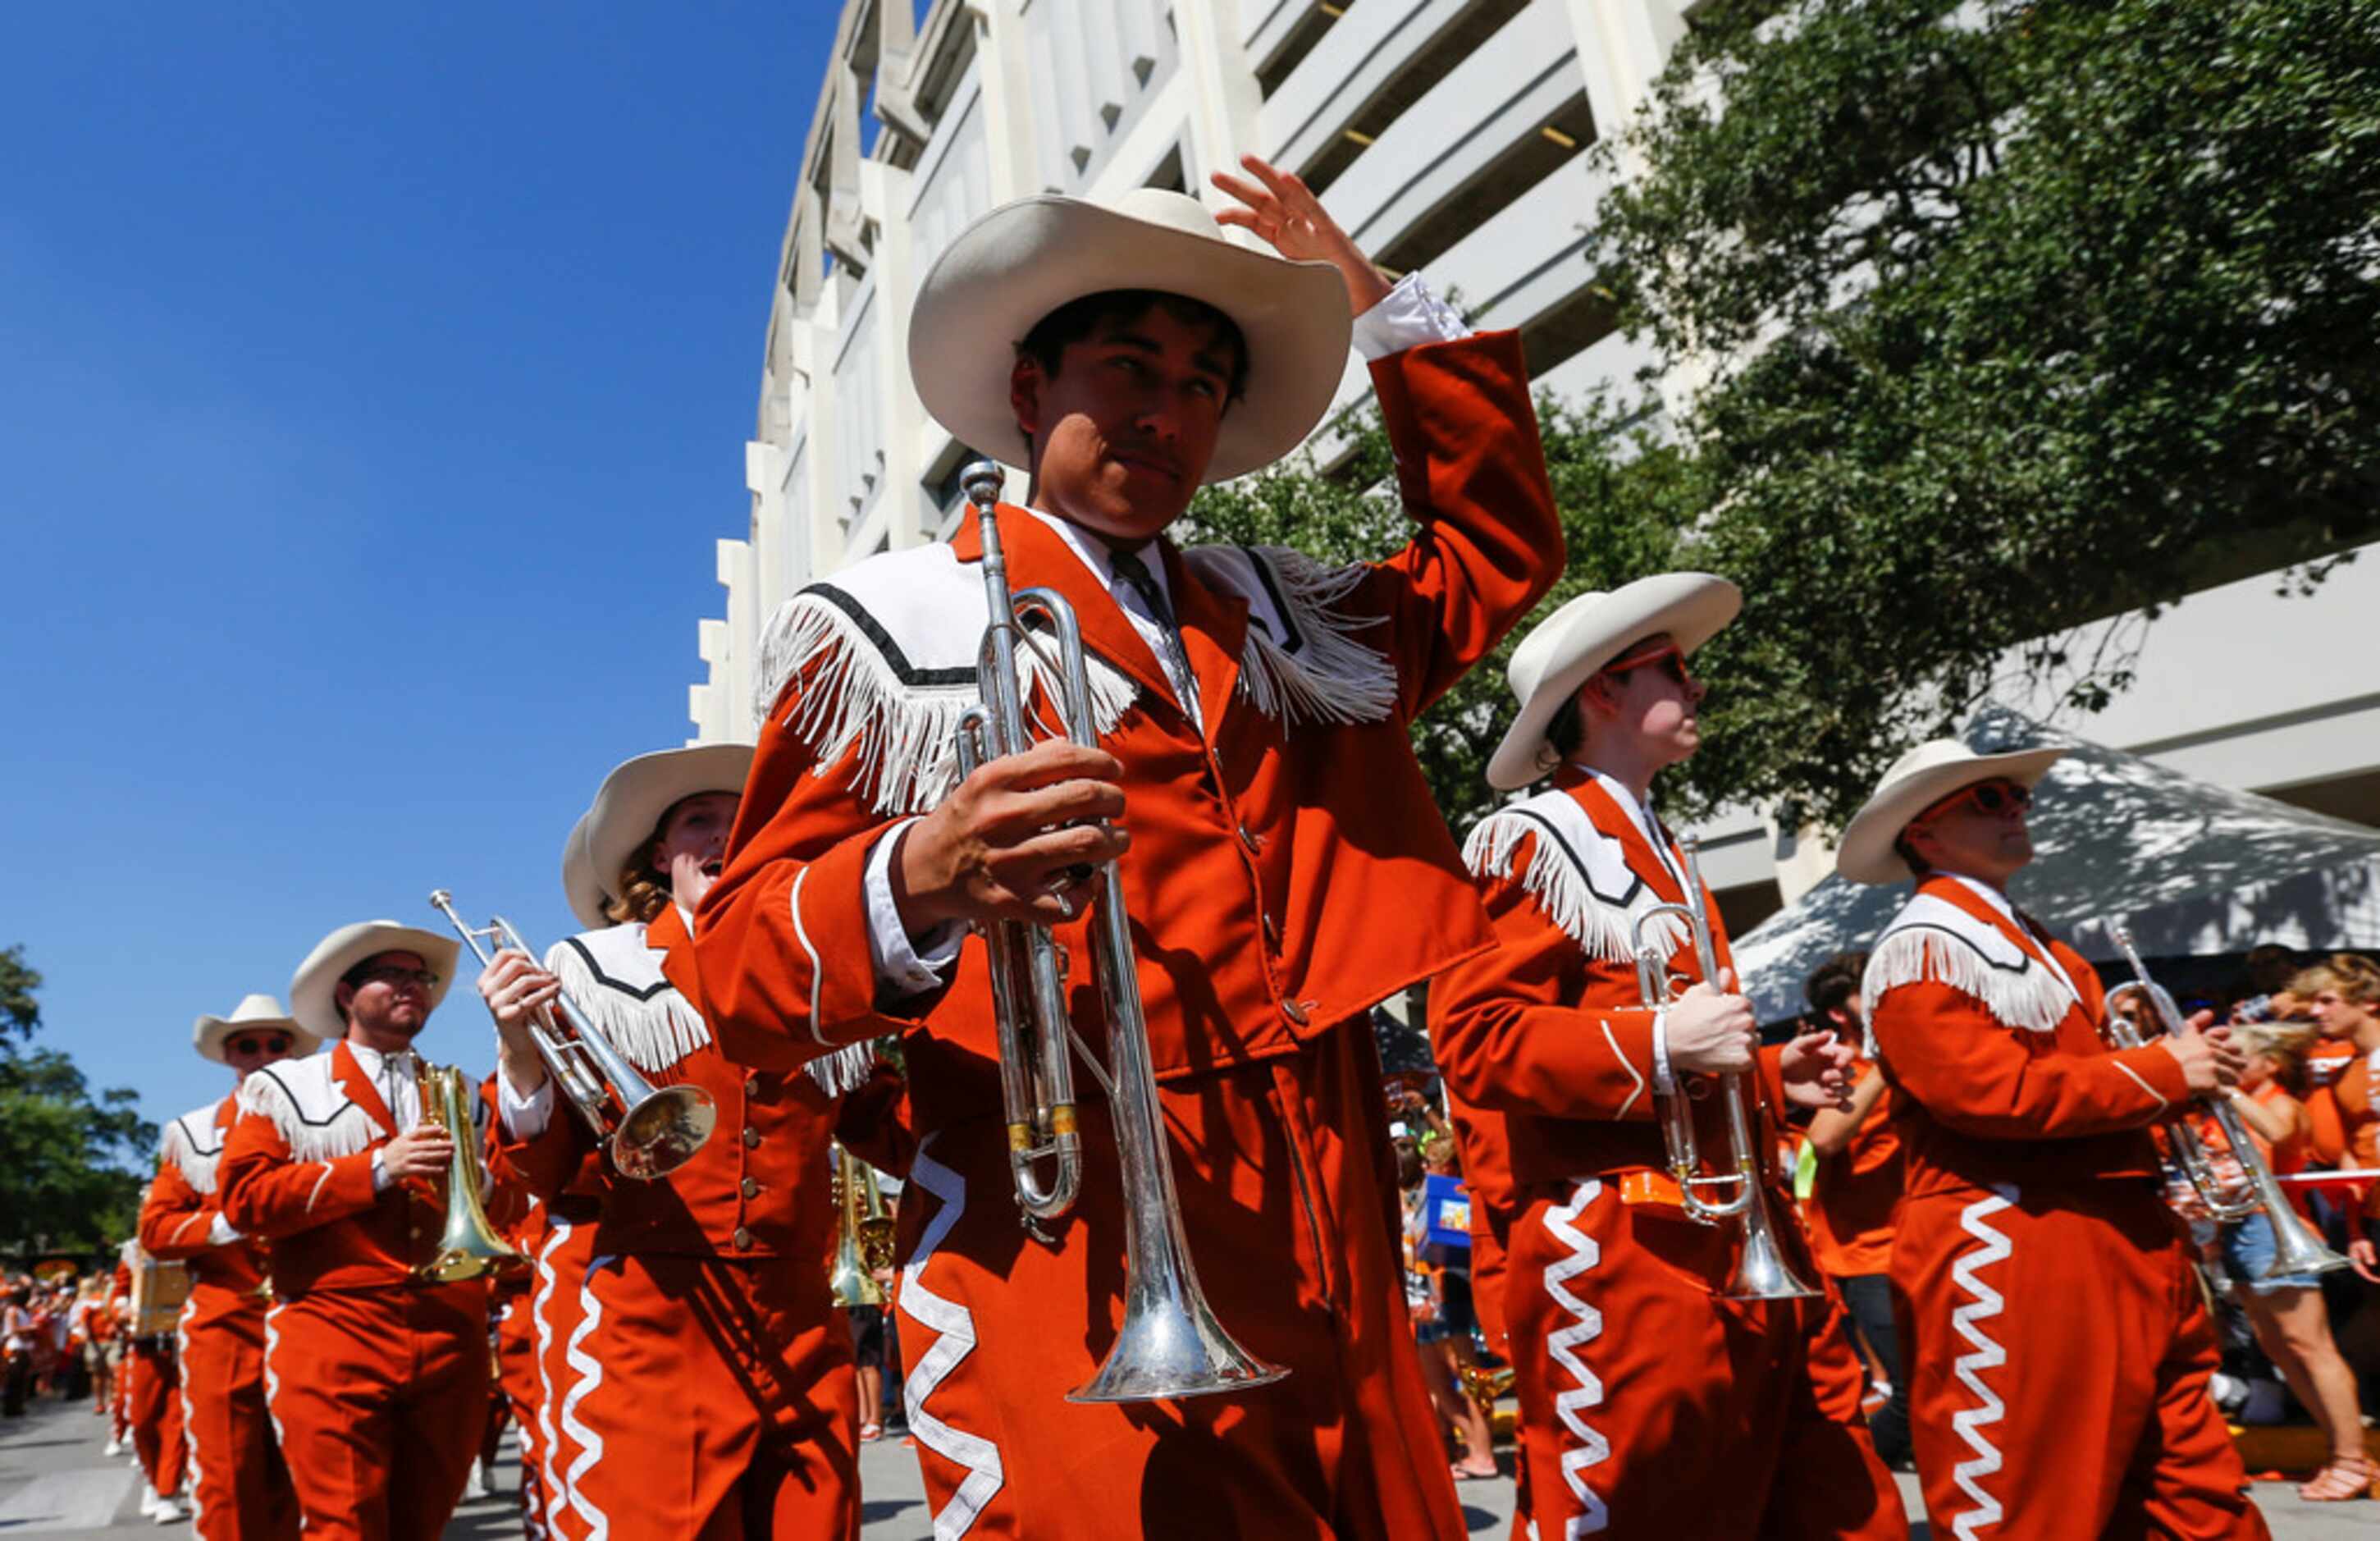 The Longhorn Band marches during the Bevo Parade prior to a college football game between...